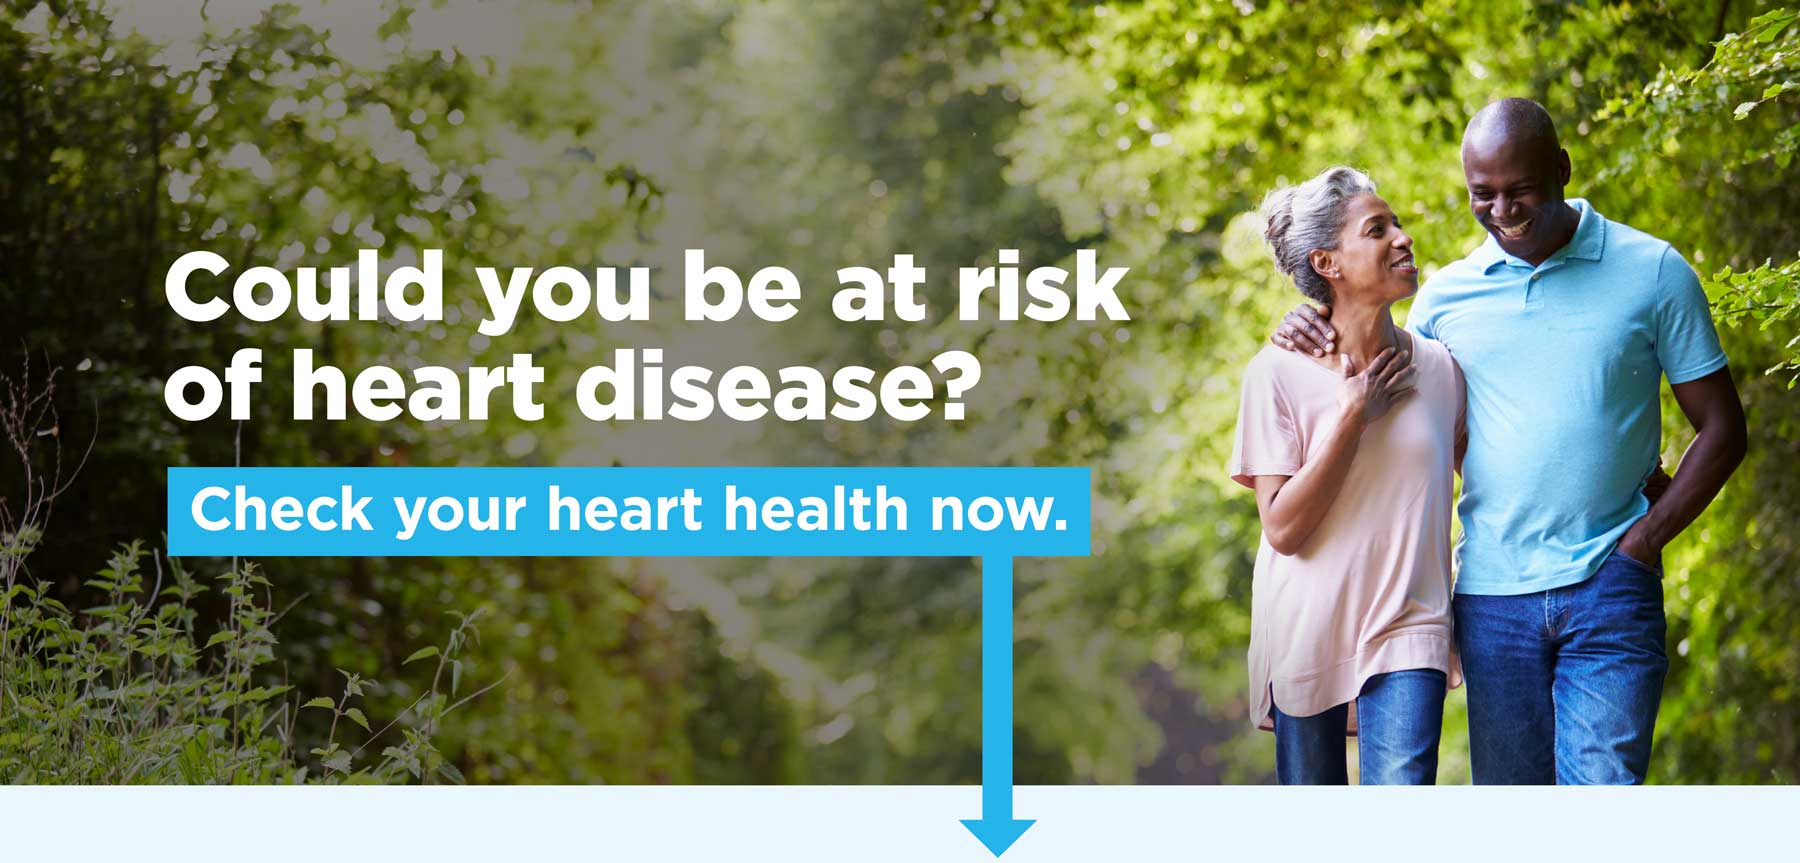 Could you be at risk for heart disease?